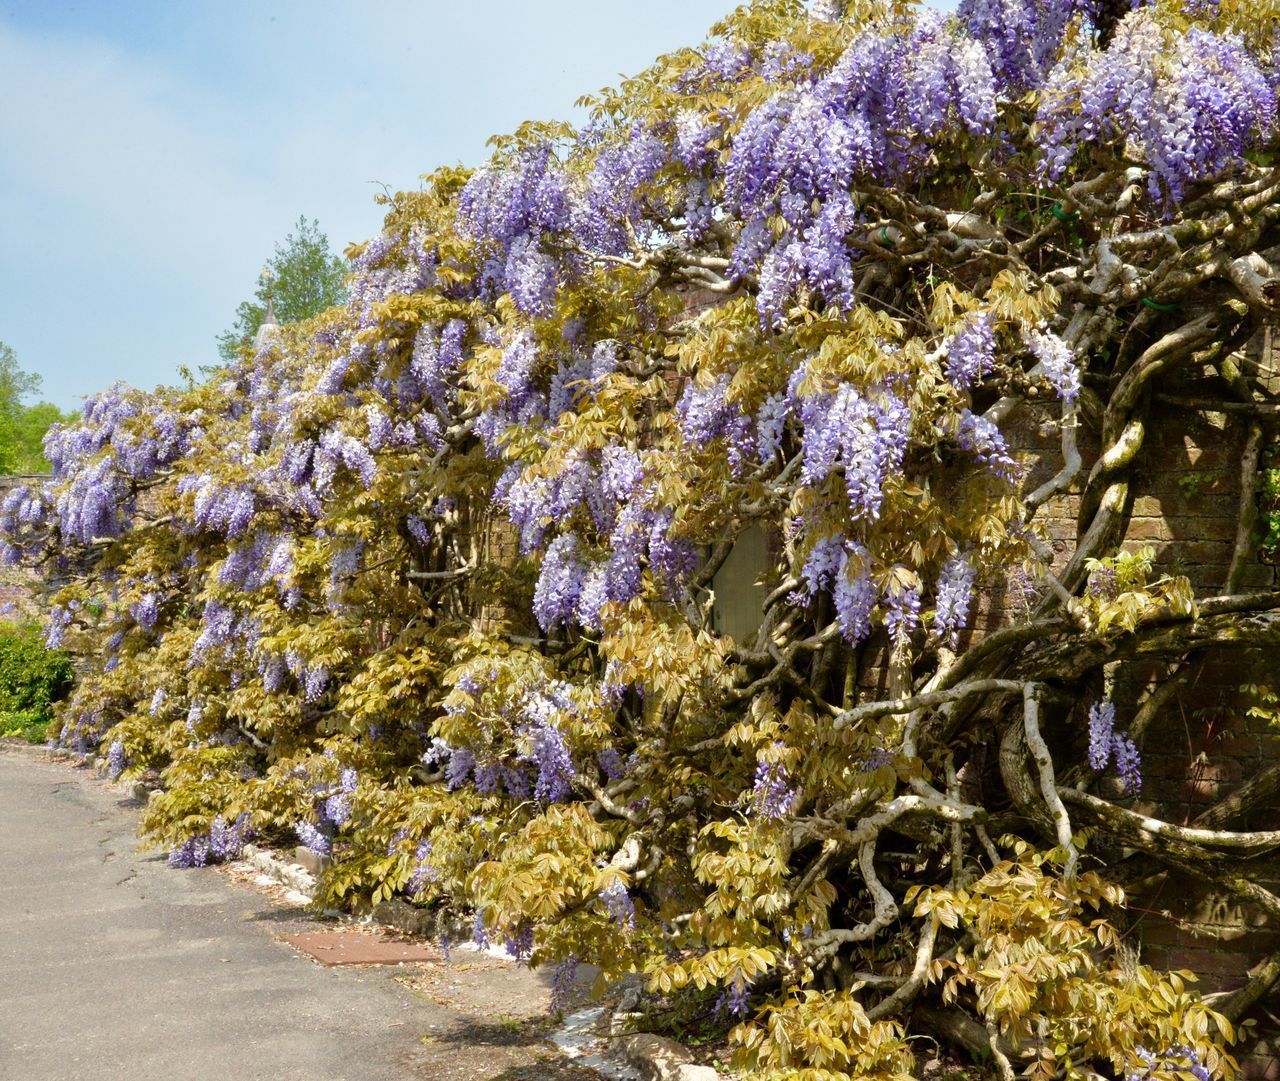 CLOSE-UP OF PURPLE FLOWERING PLANTS AGAINST TREES